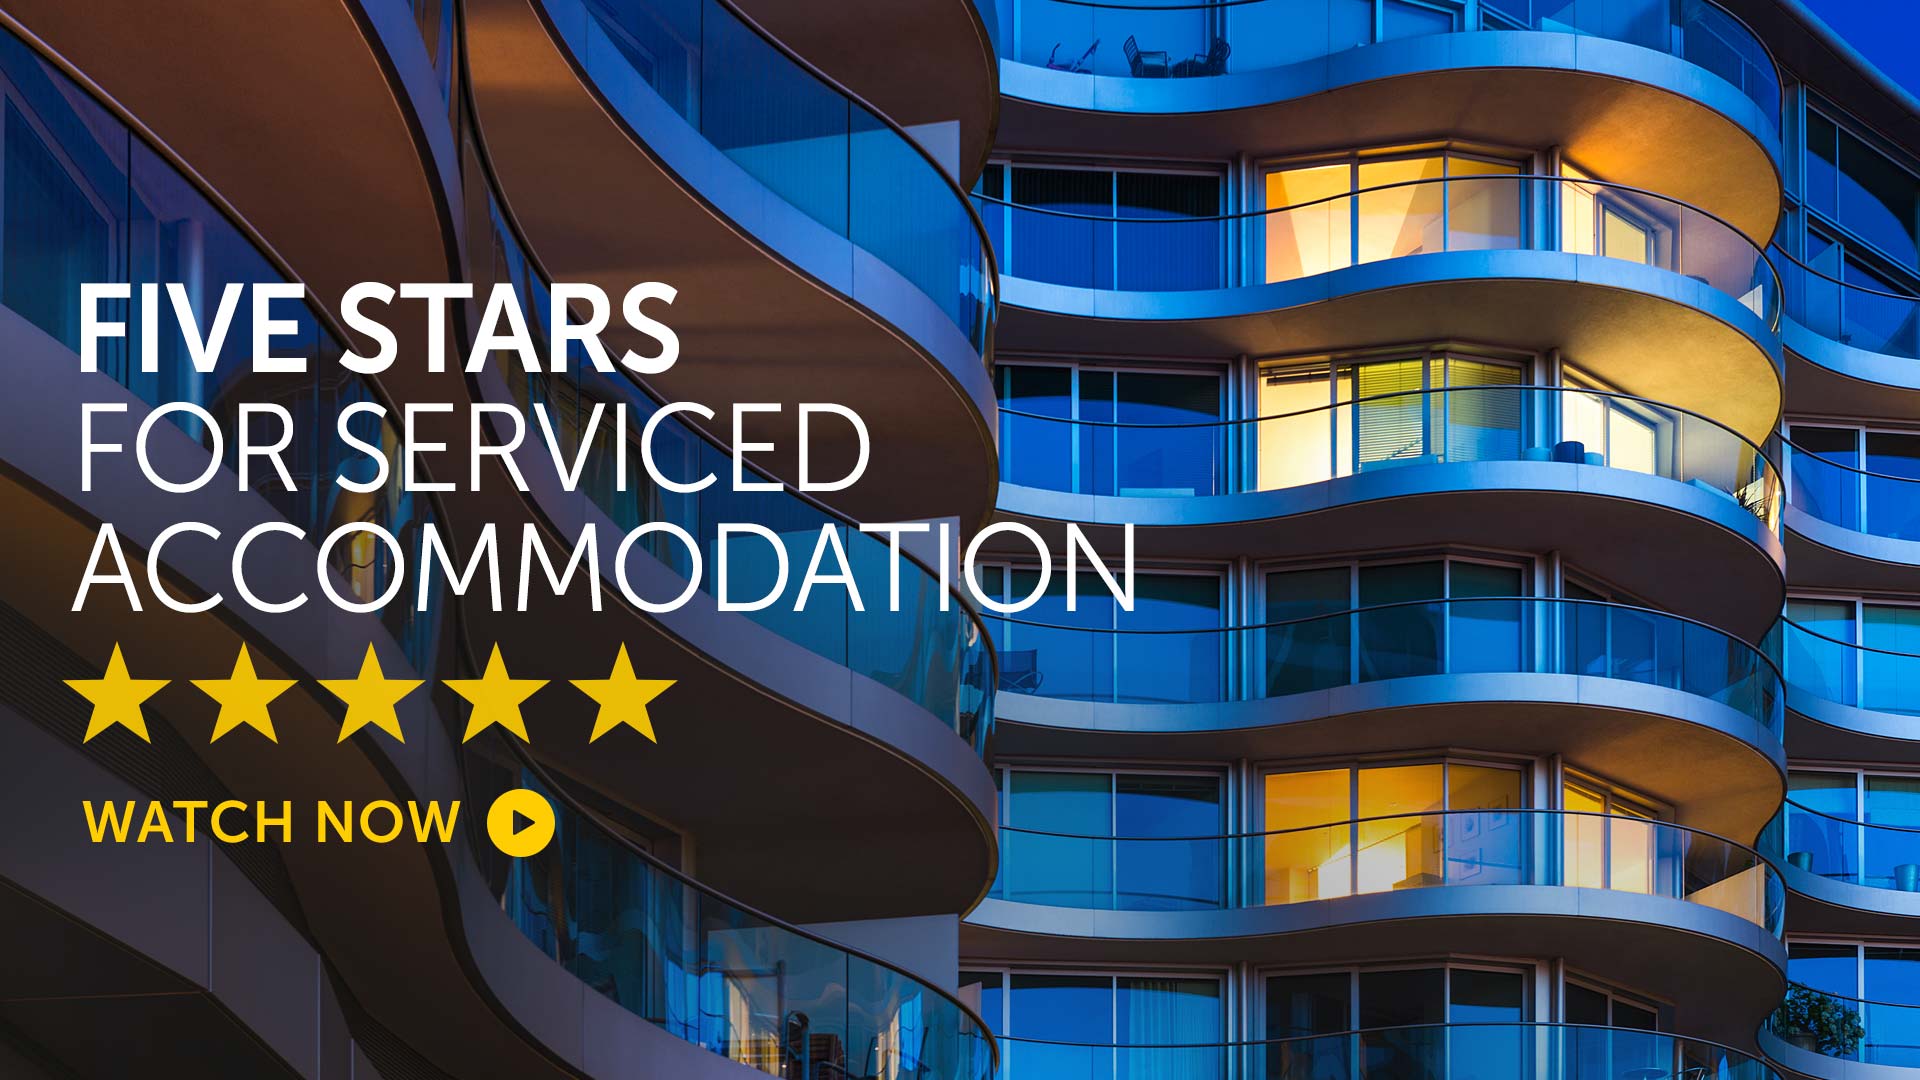 Briefing: Serviced Accommodation gets five-star recognition